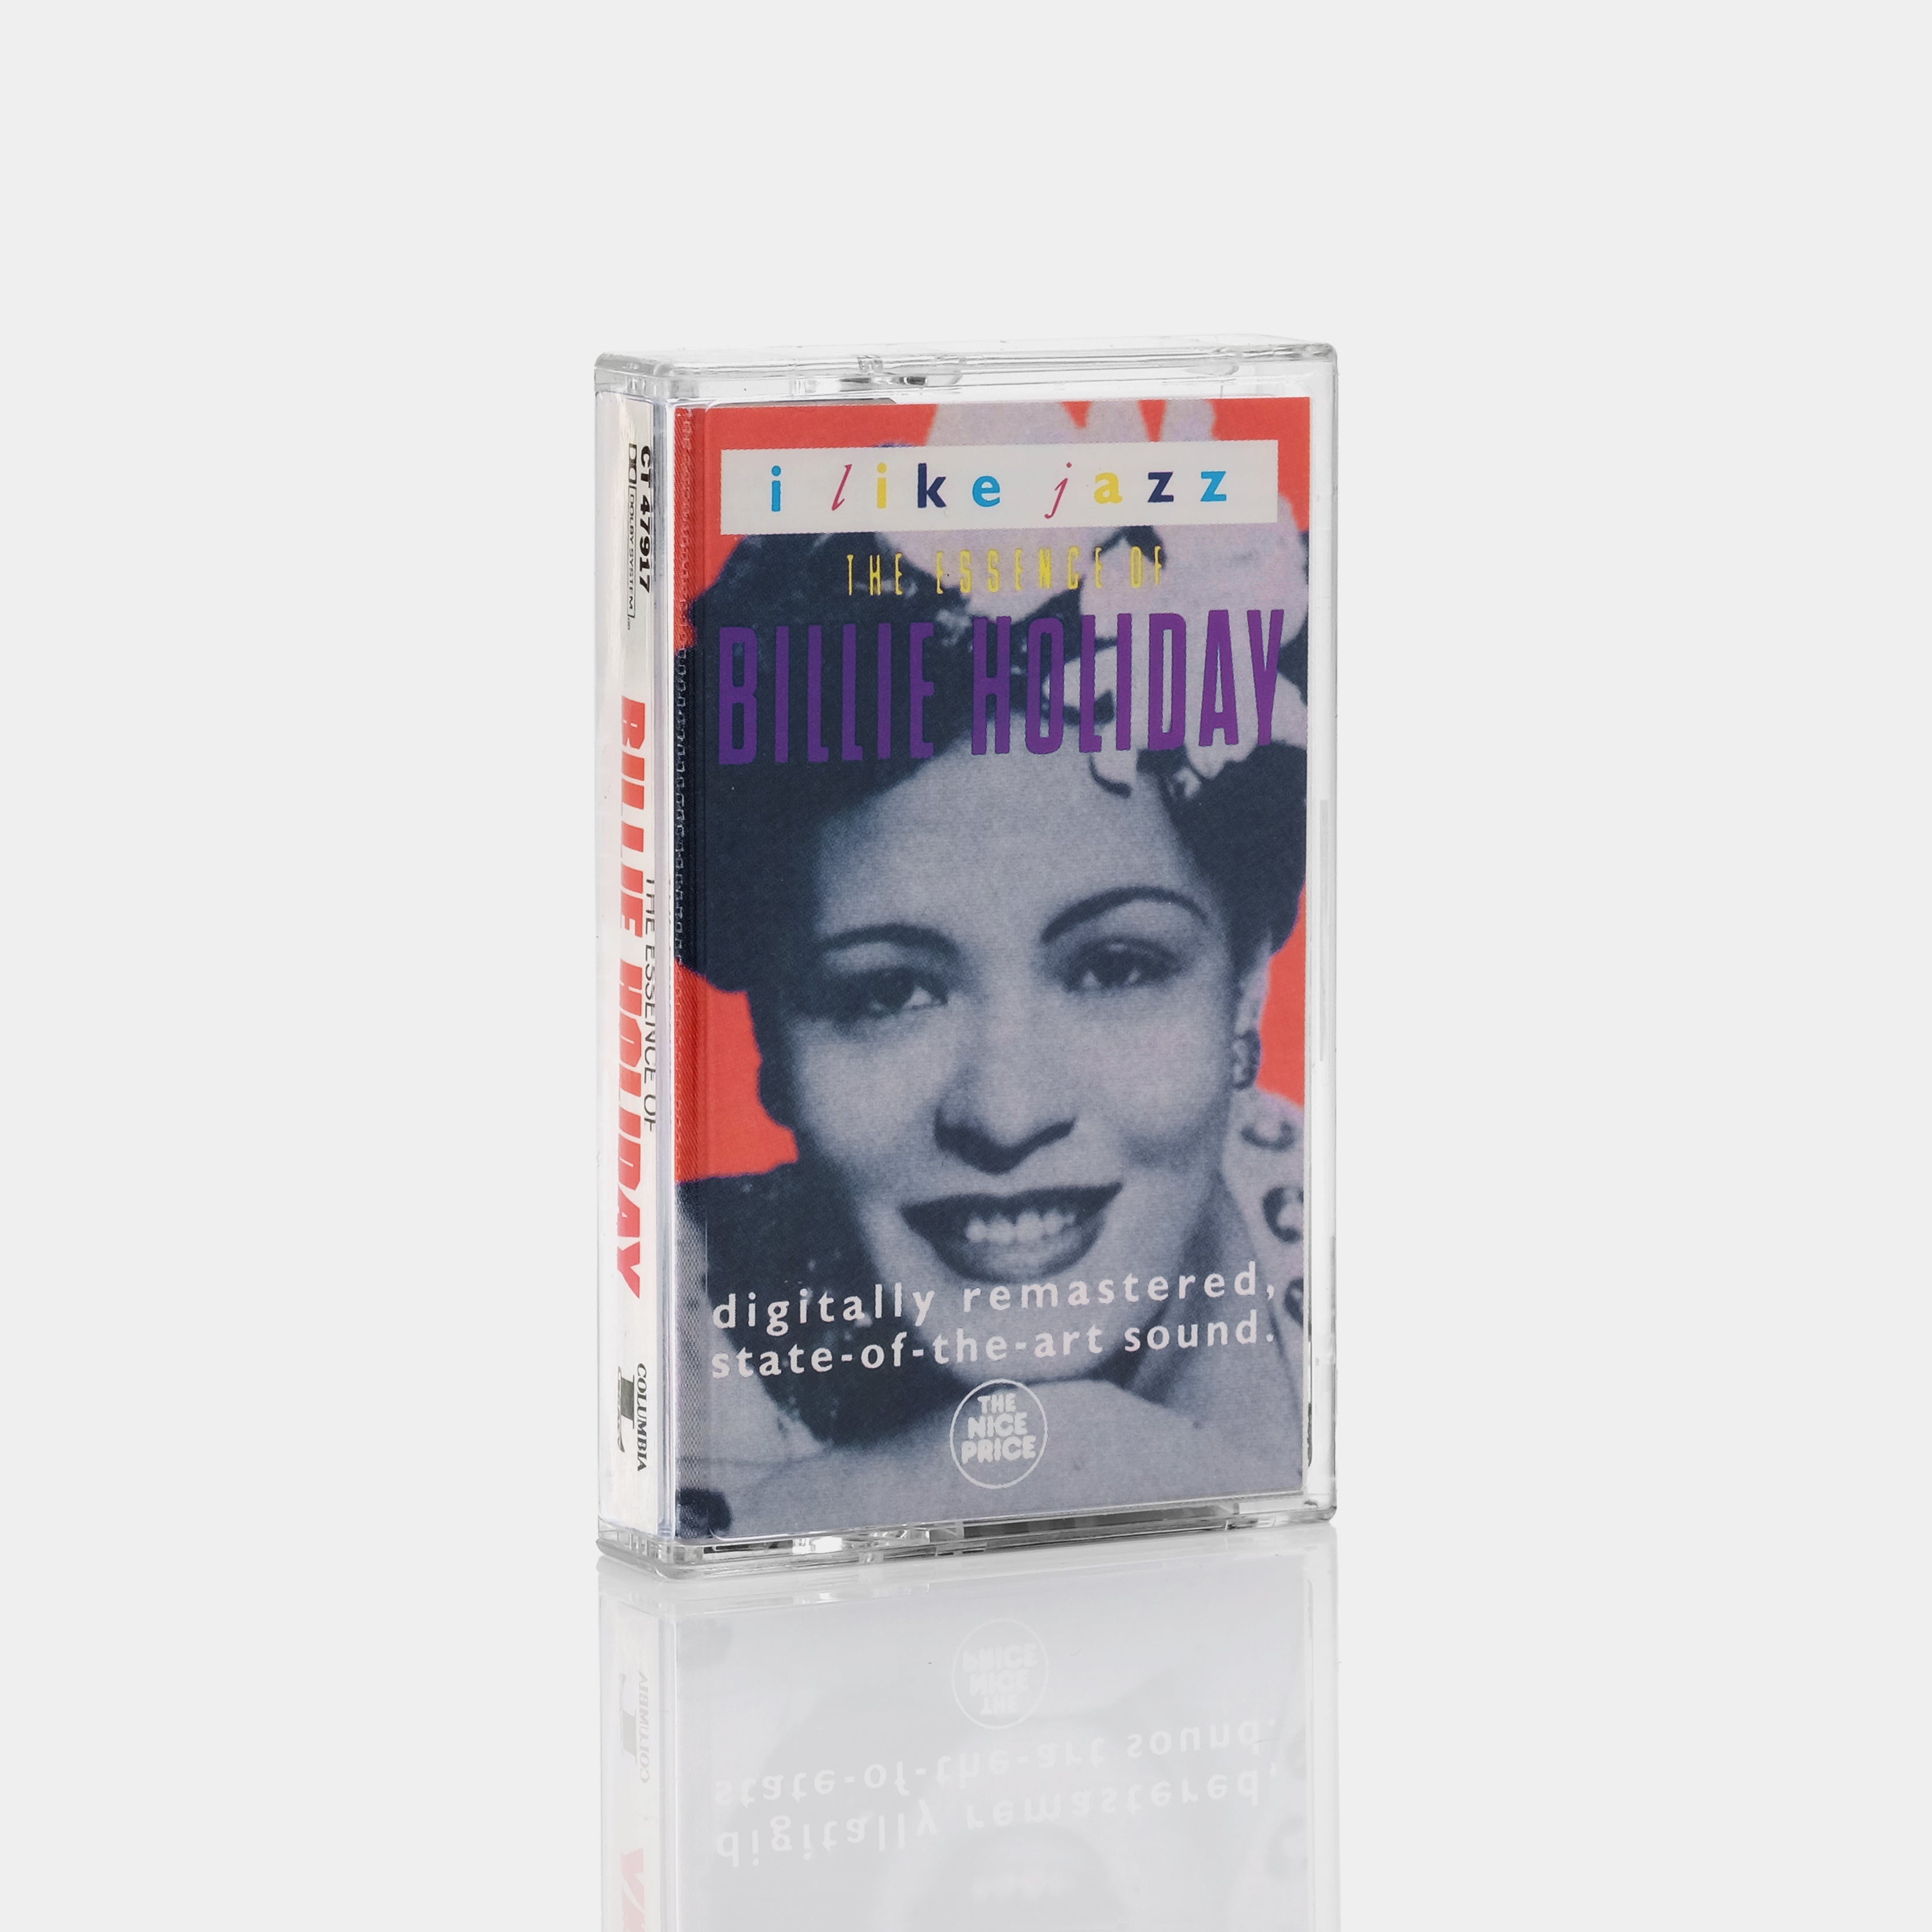 Billie Holiday - The Essence Of Billie Holiday Cassette Tape